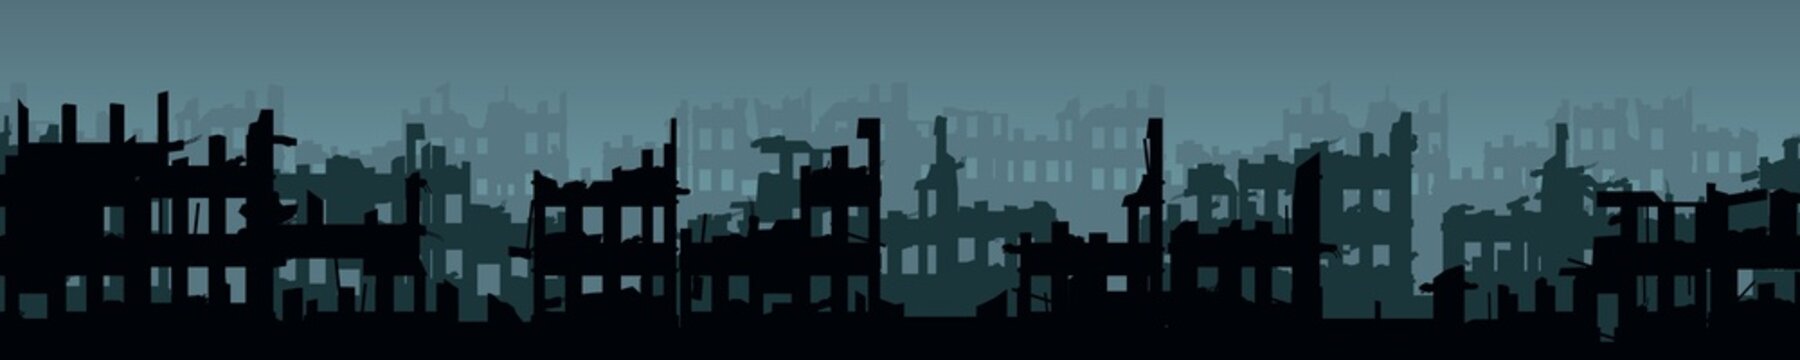 Bombed street. Ruined city. Scary evening twilight. Apocalypse natural or war. Seamless horizontal composition. Sad landscape of destruction. Vector